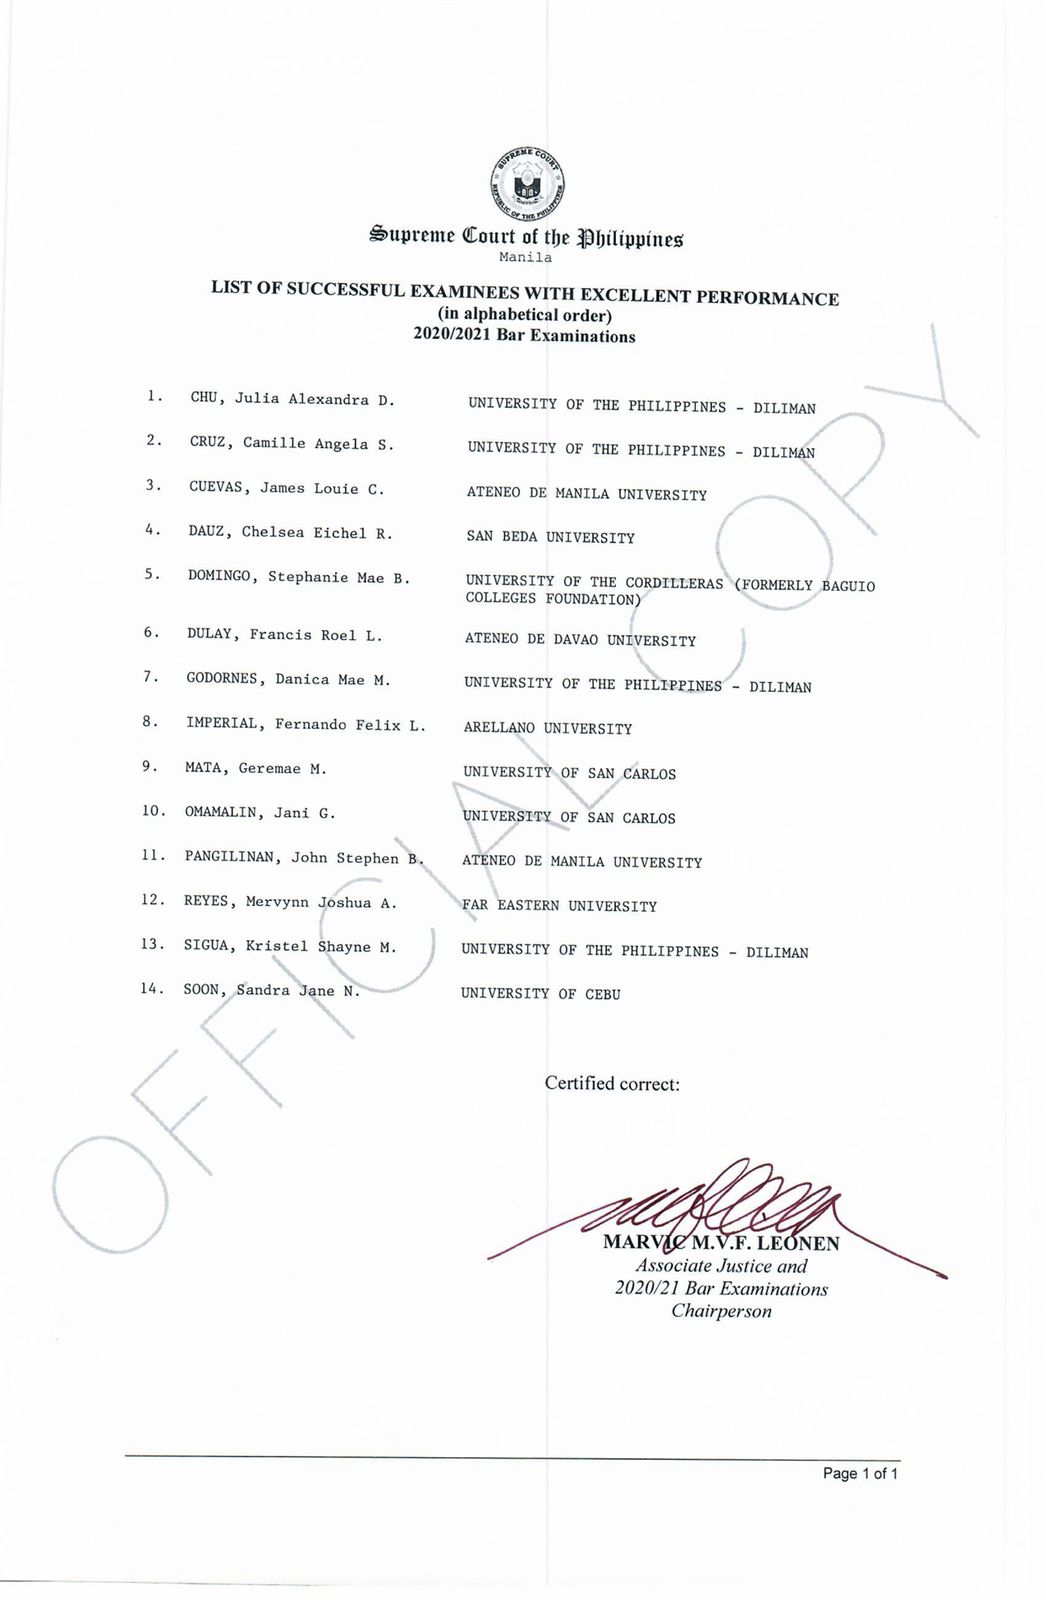 List of Excellent and Exemplary performance in the 2020/21 Bar exam